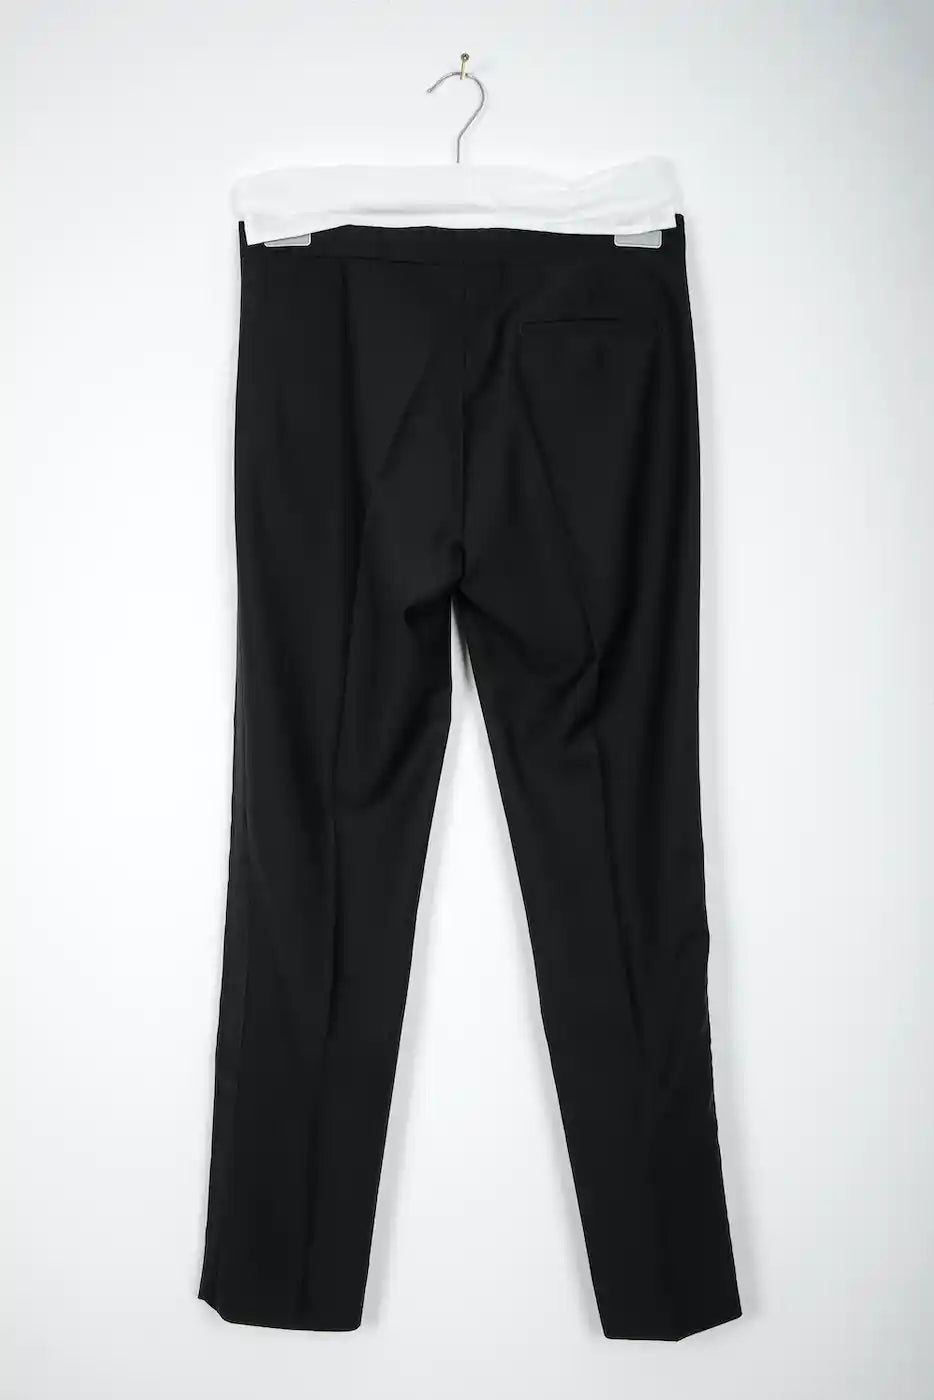 2015 S/S EVENING BLACK PANTS IN TROPICAL WOOL